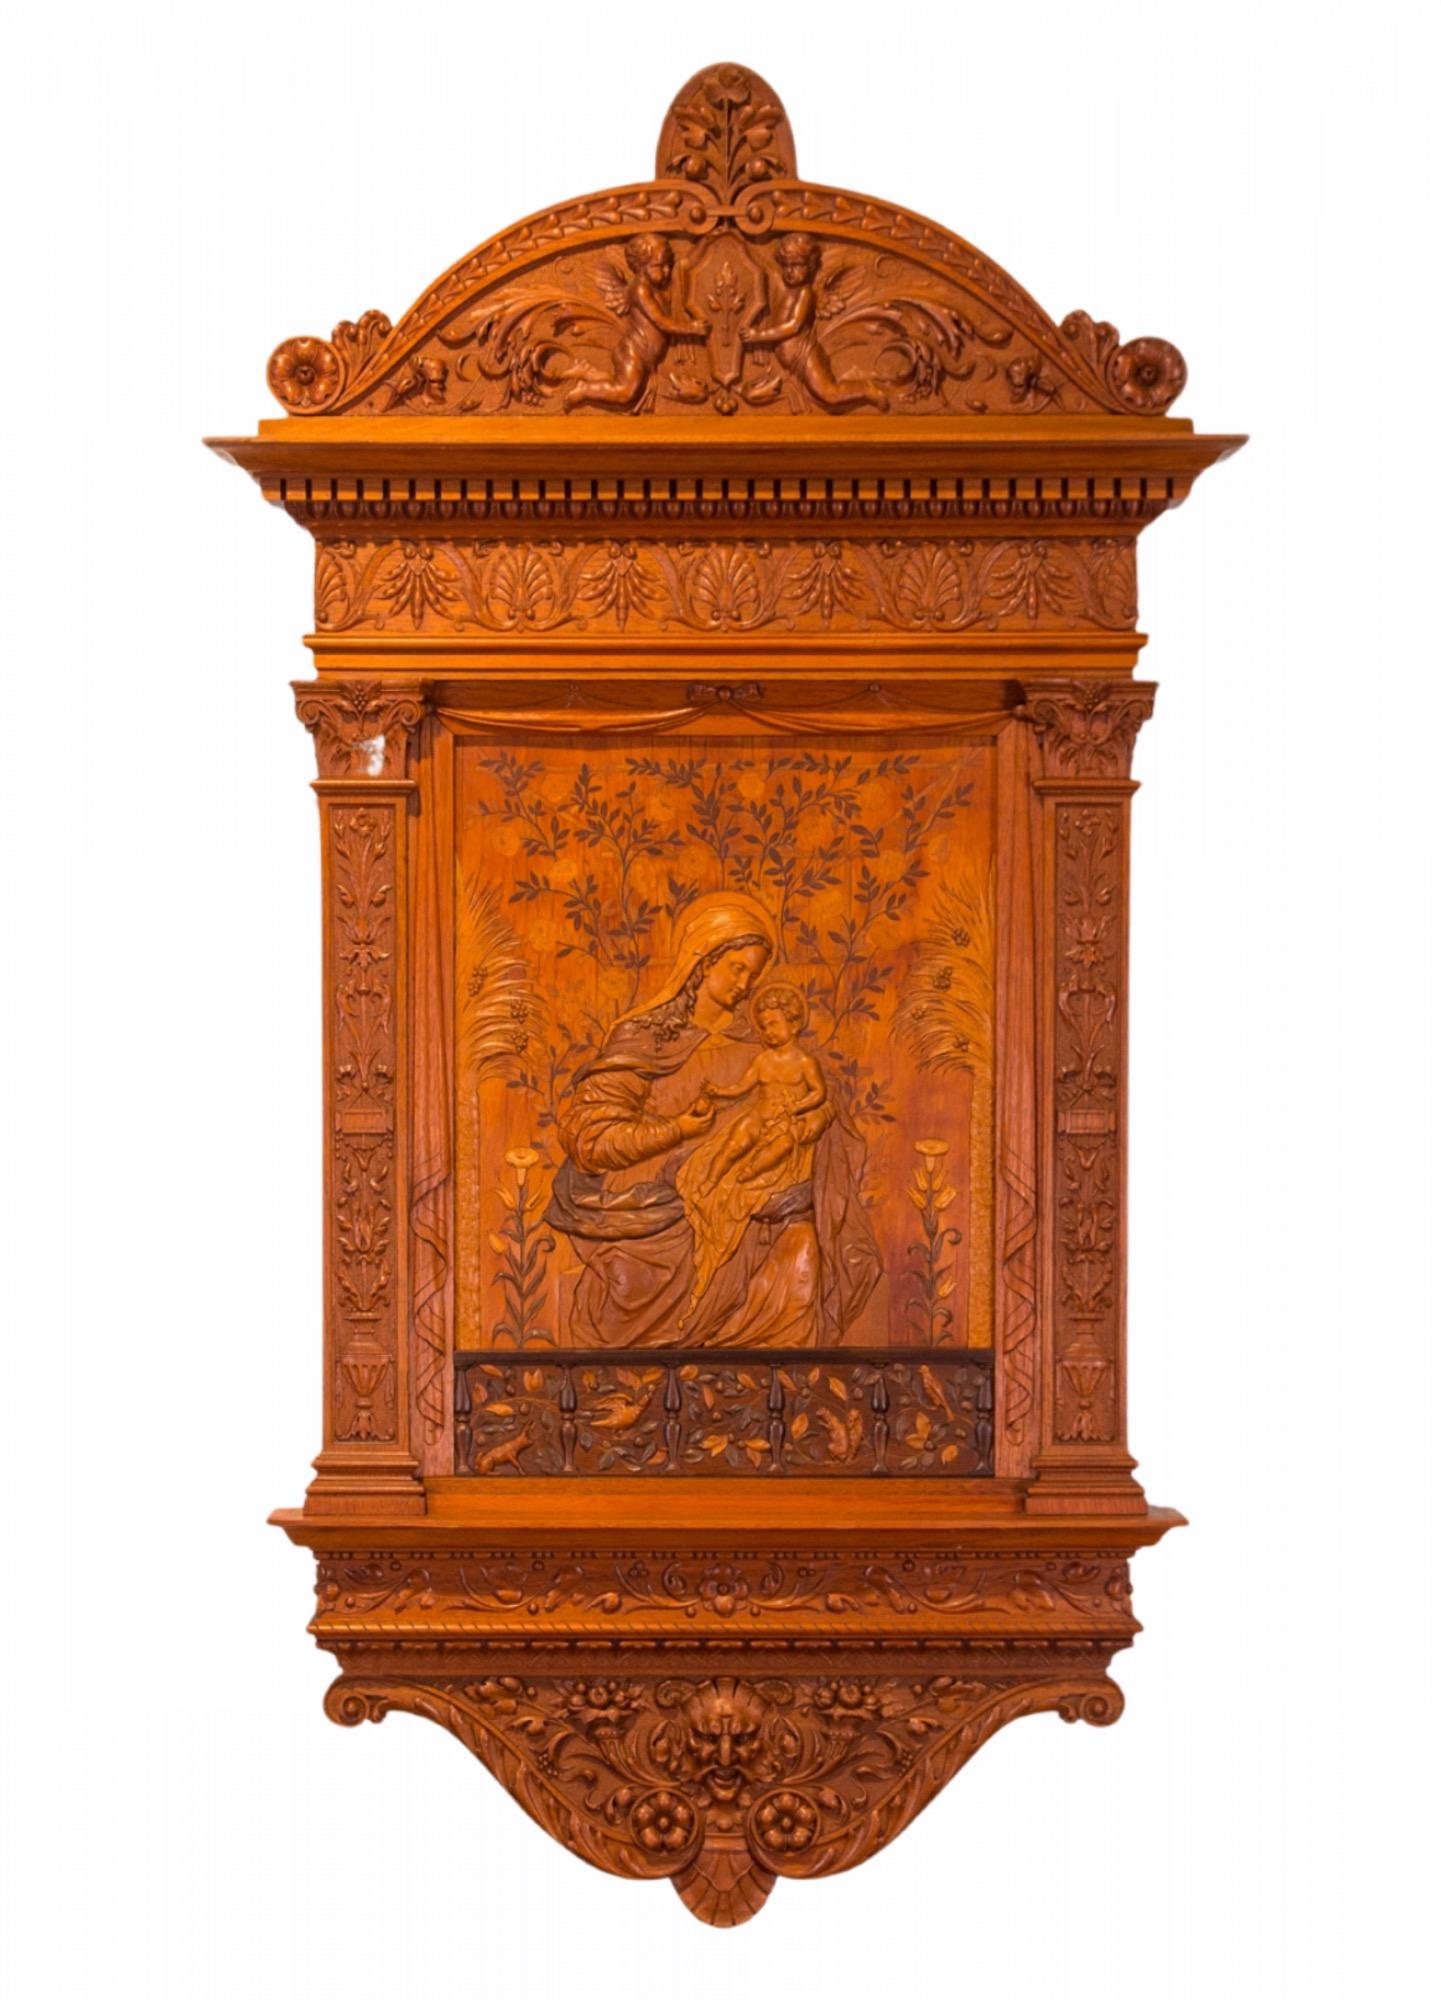 Early 19th Century Italian carved-wood in high relief composed of various types of woods set into a marquetry panel with flat inlaid scrolling fruit tree foliage. The piece is comprised of The Virgin Mary handing an apple to Jesus as a child, which